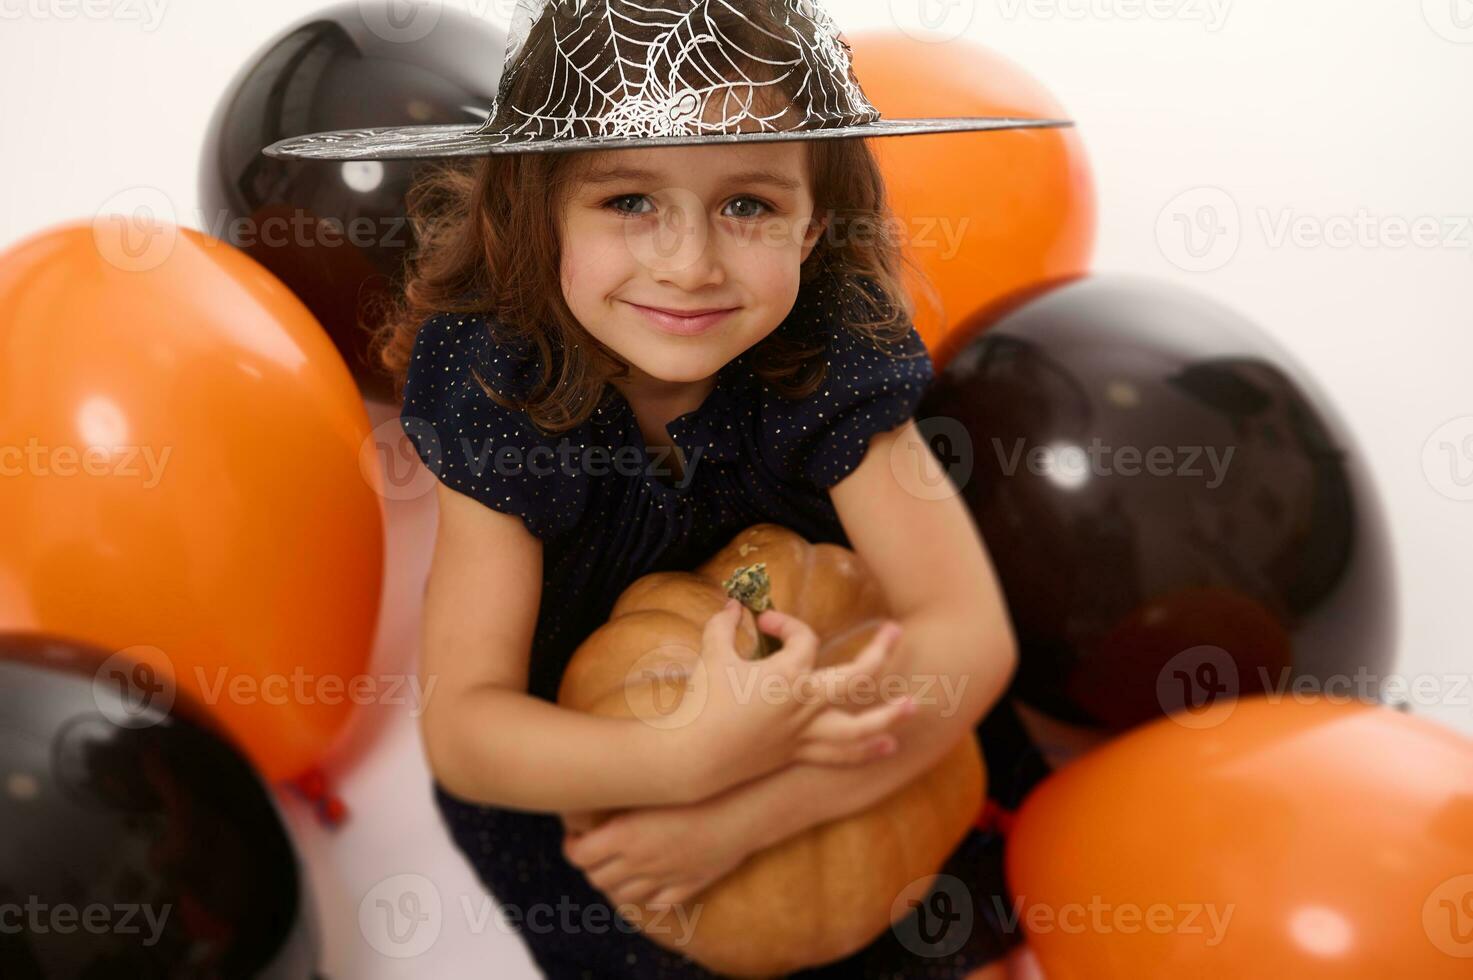 4 years old little girl in witch costume and wizard hat plays with balloons and a pumpkin isolated on white background. Concept of a child having fun at Halloween party photo